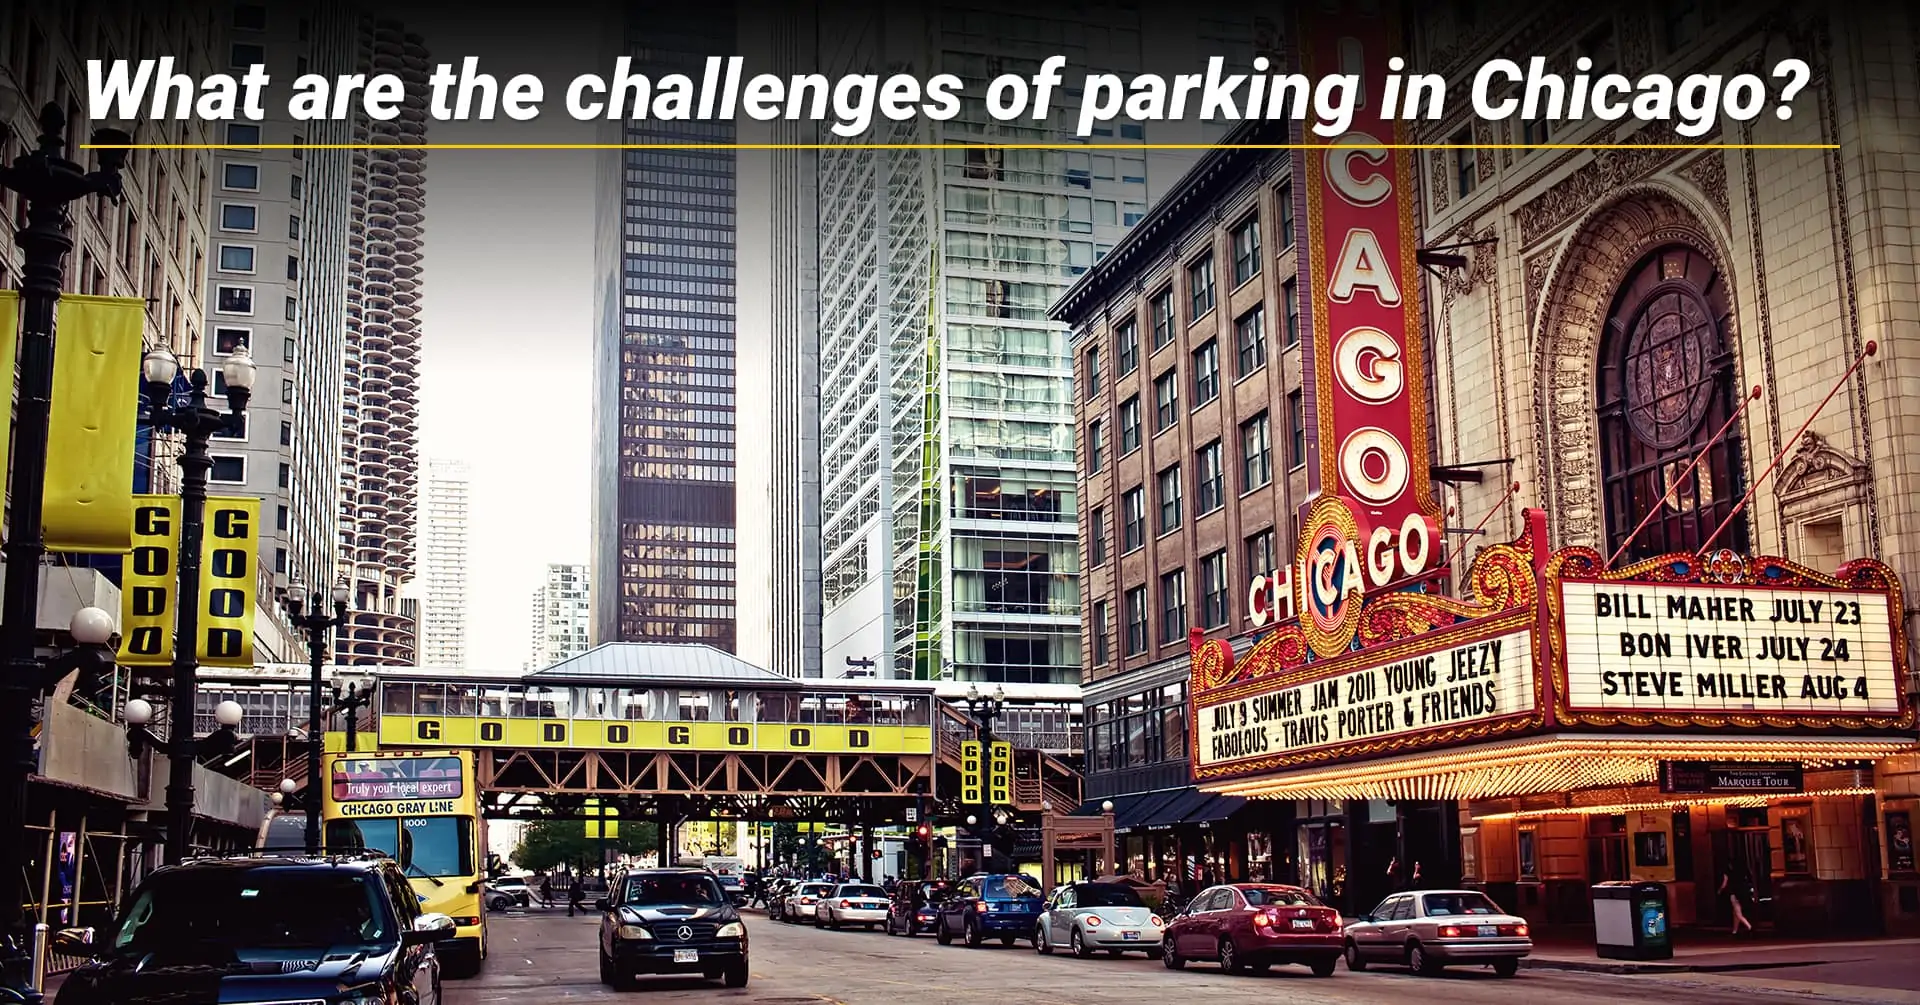 What are the challenges of parking in Chicago?